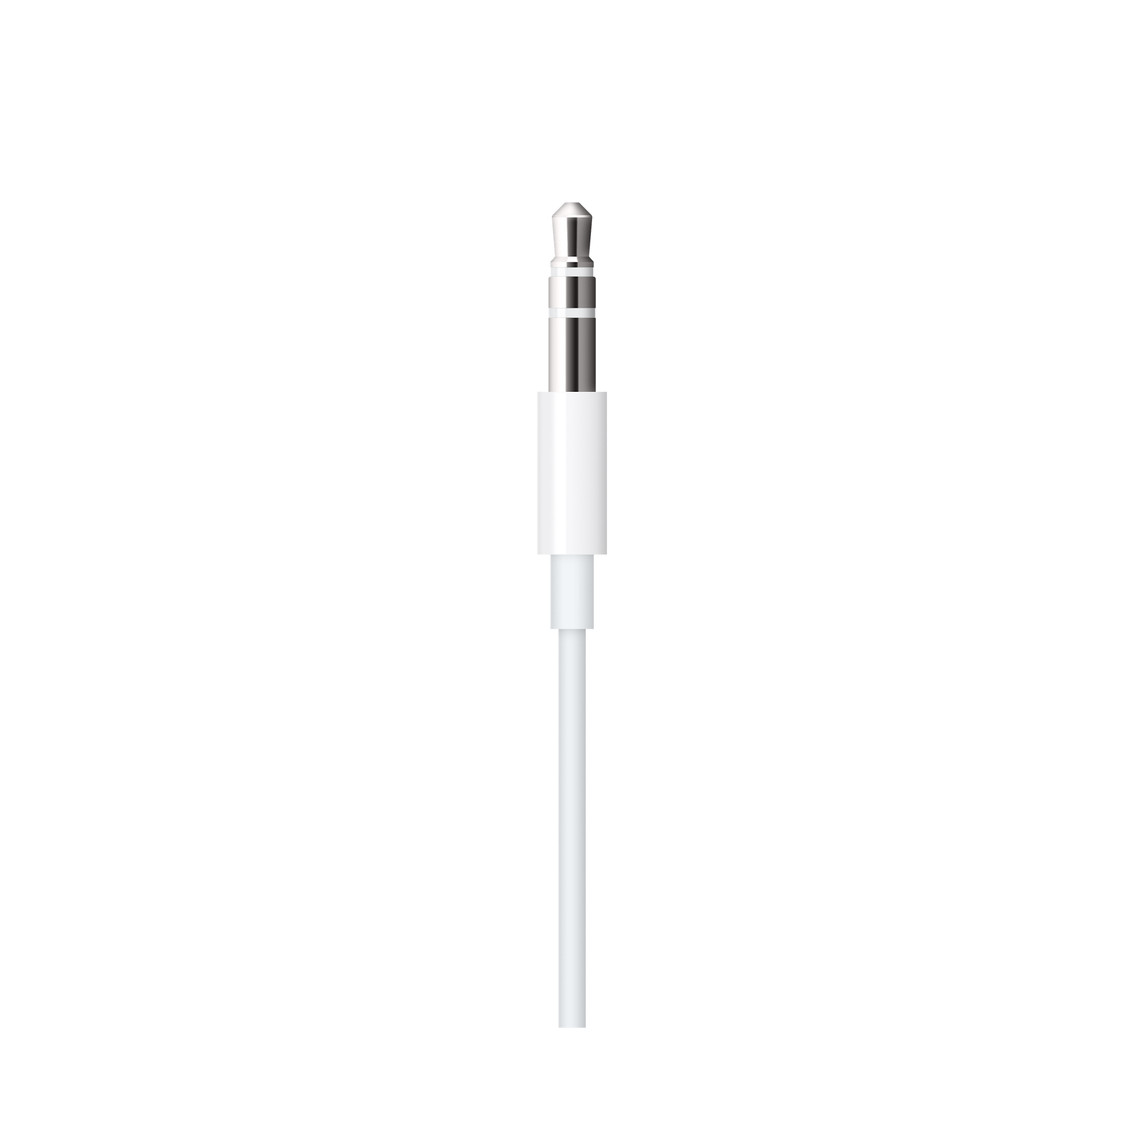 Lightning to 3.5 millimetre Audio Cable (1.2 metres), in white, is a bi-directional cable that can be used with audio-out and audio-in ports.